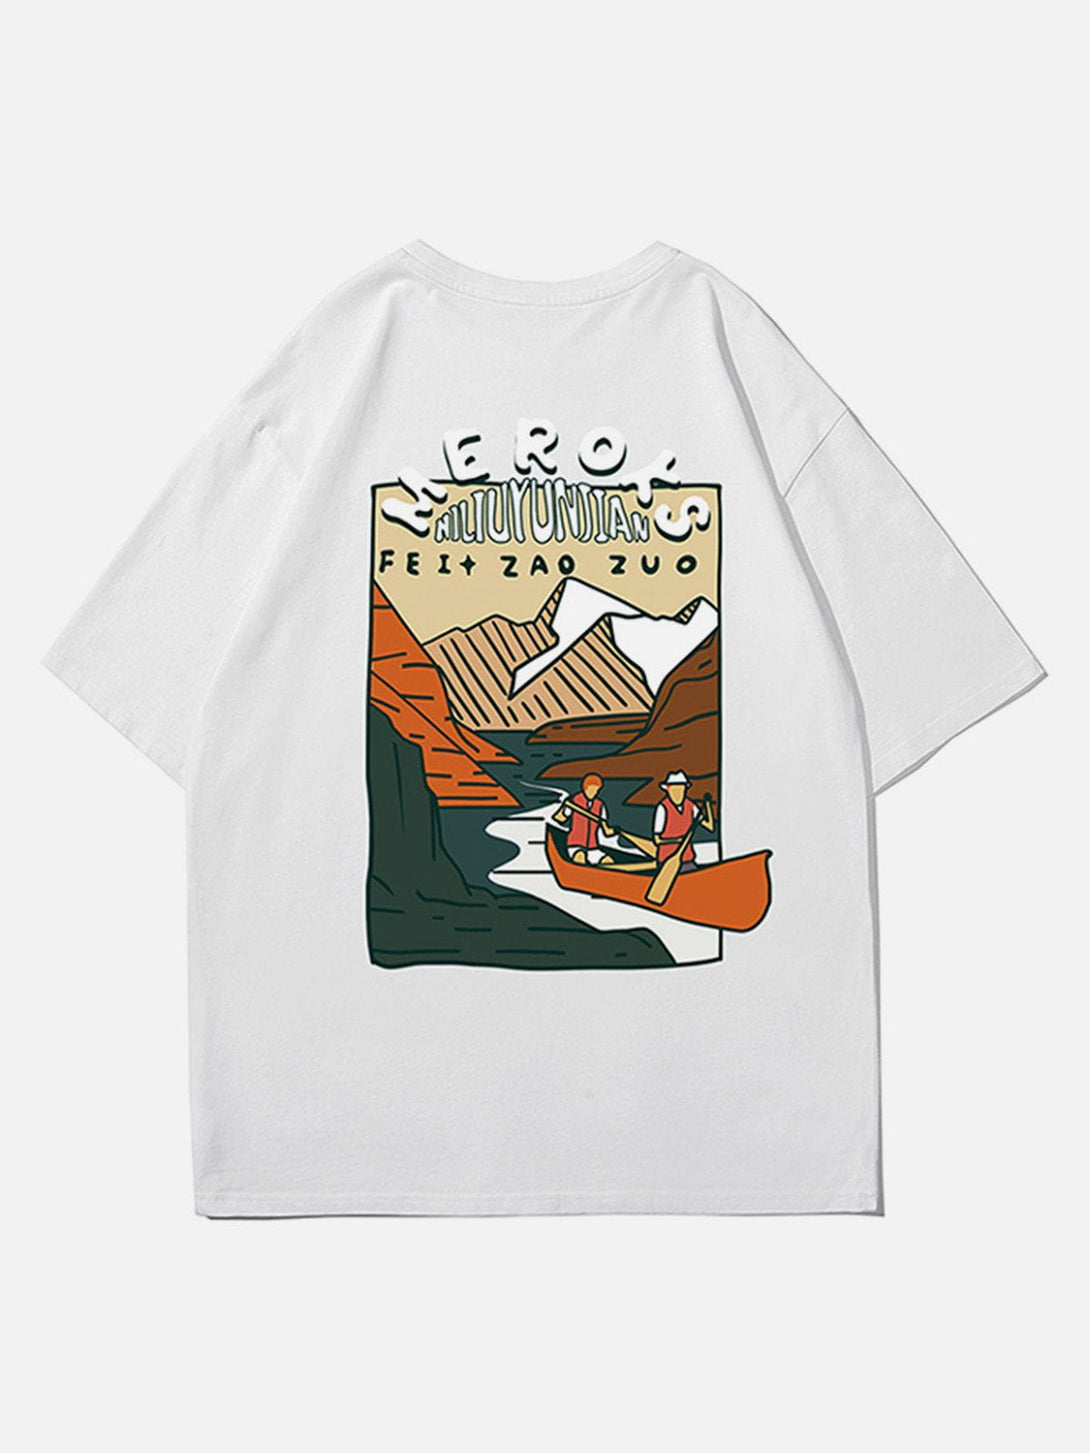 Majesda® - Valley Boating Graphic Tee- Outfit Ideas - Streetwear Fashion - majesda.com